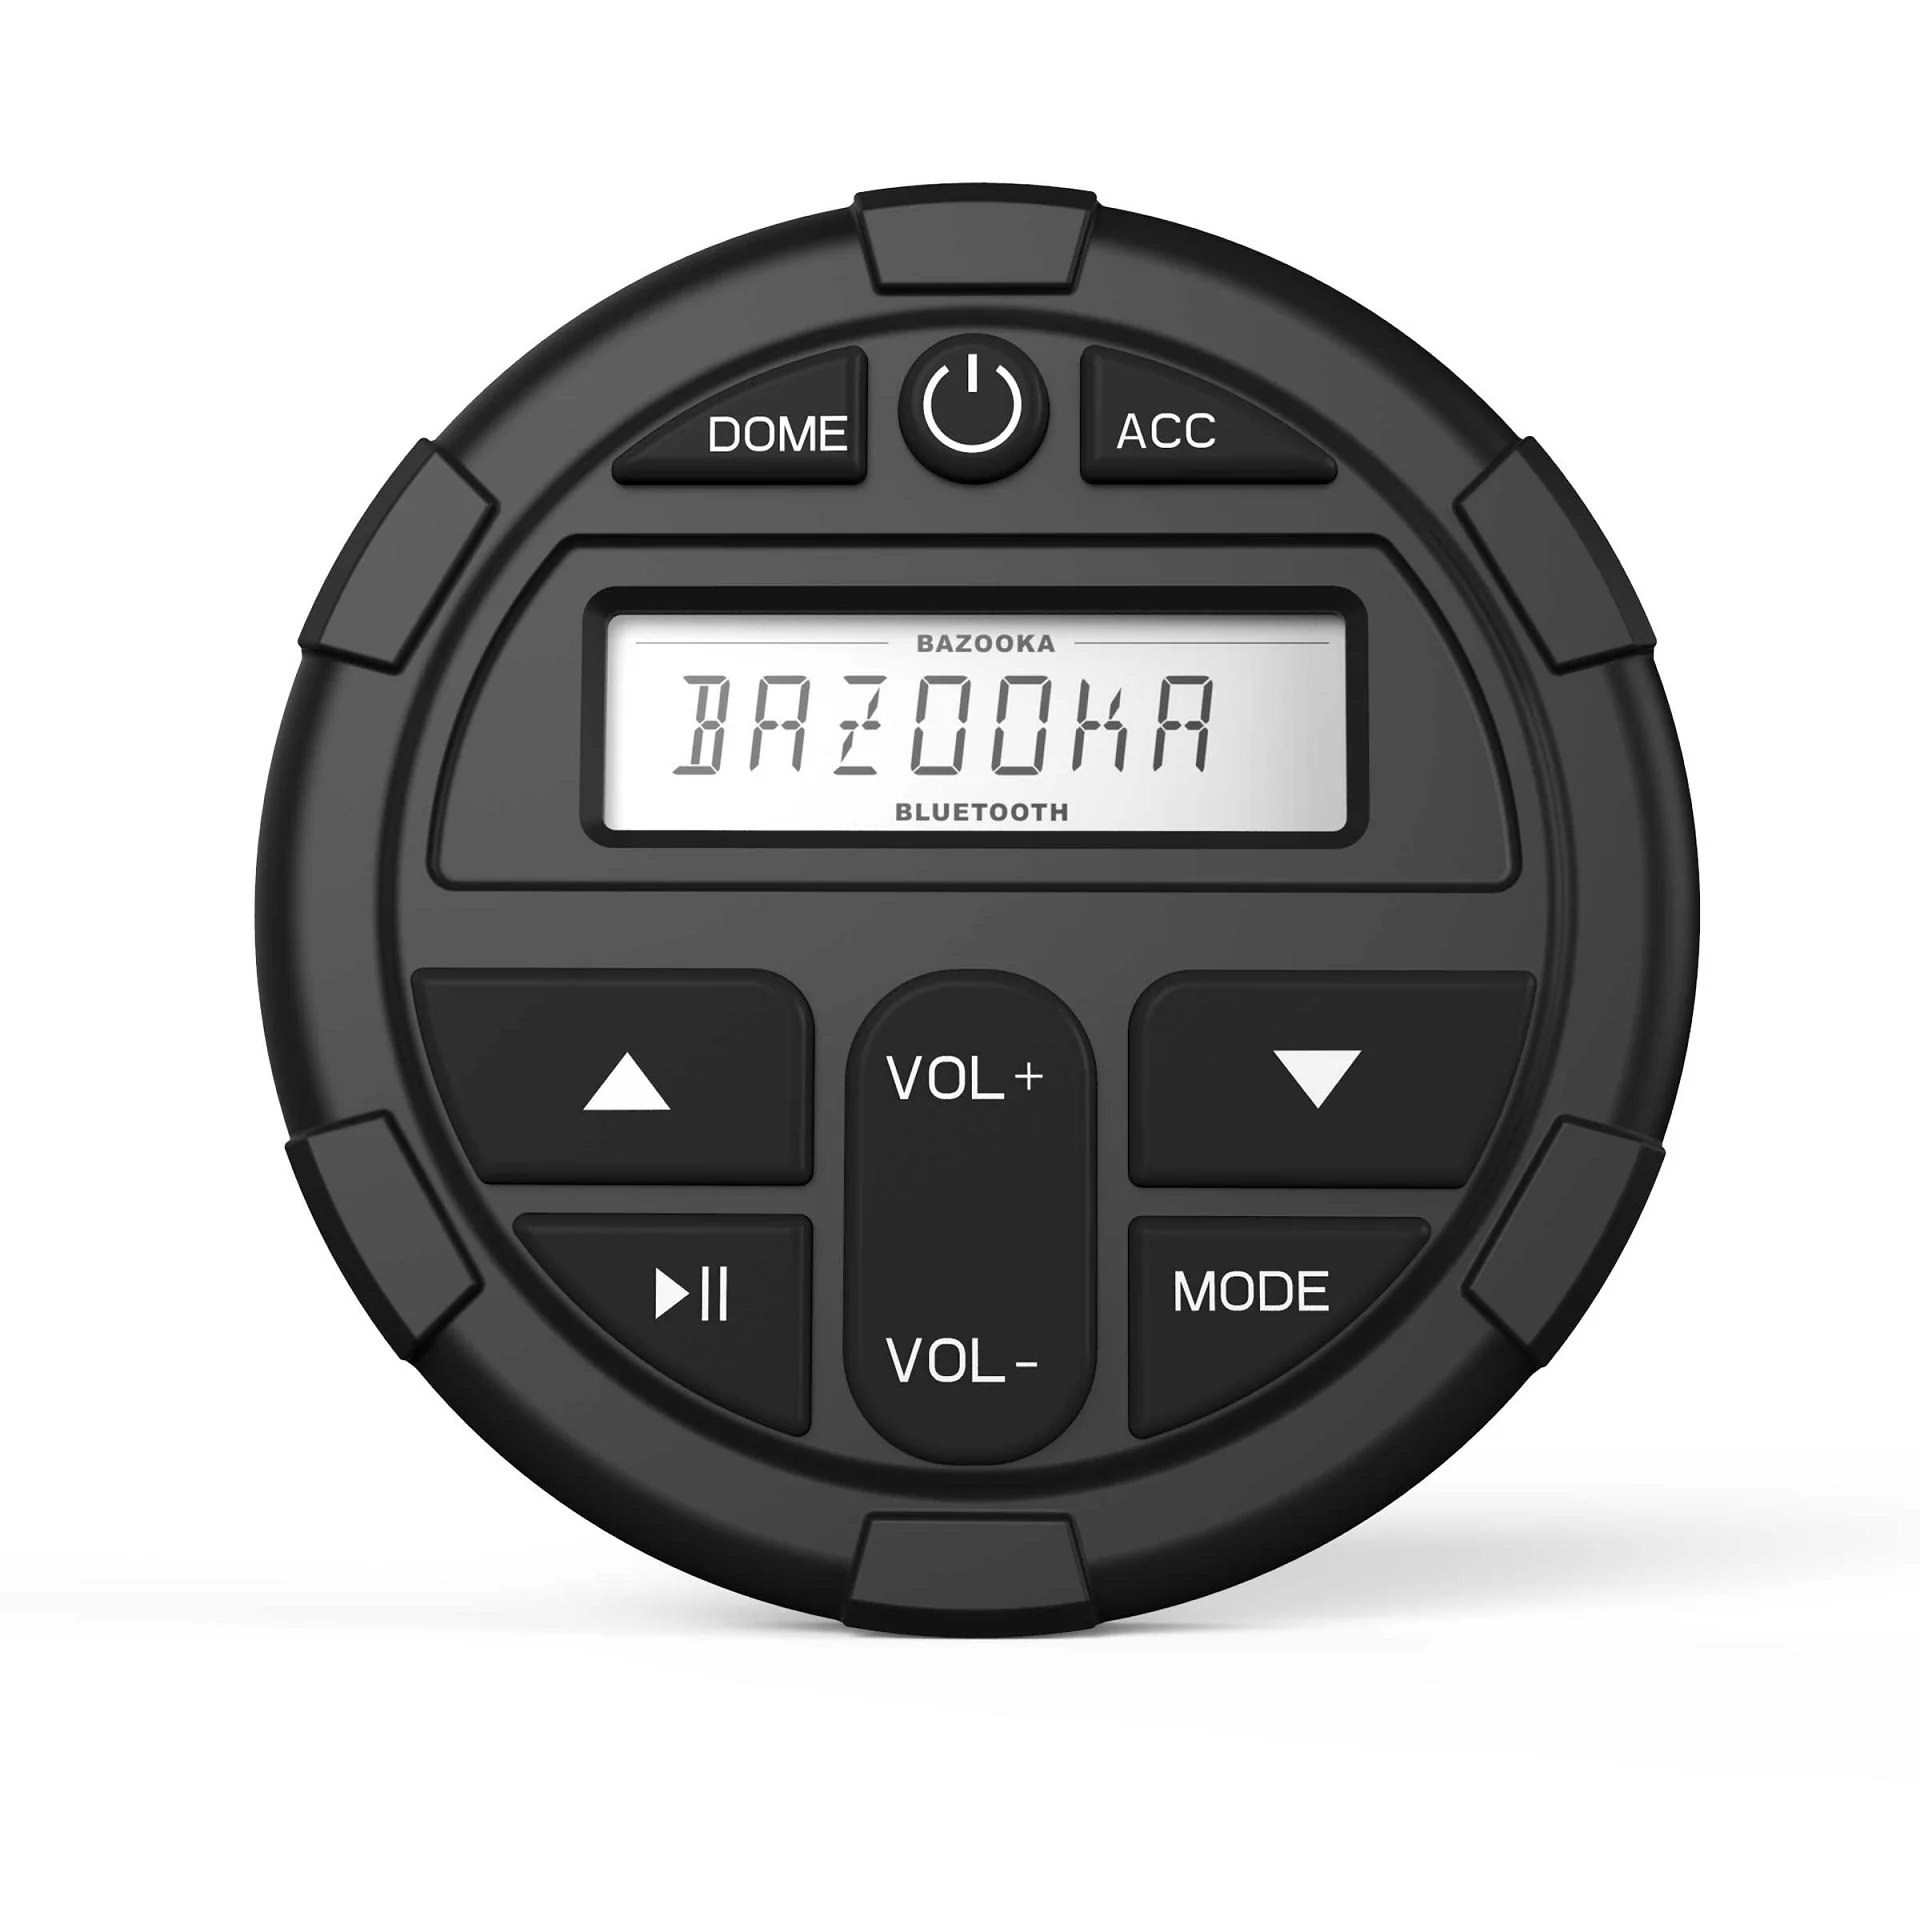 BPB-DBC-G2 Wireless G2 Dashboard Controller Questions & Answers